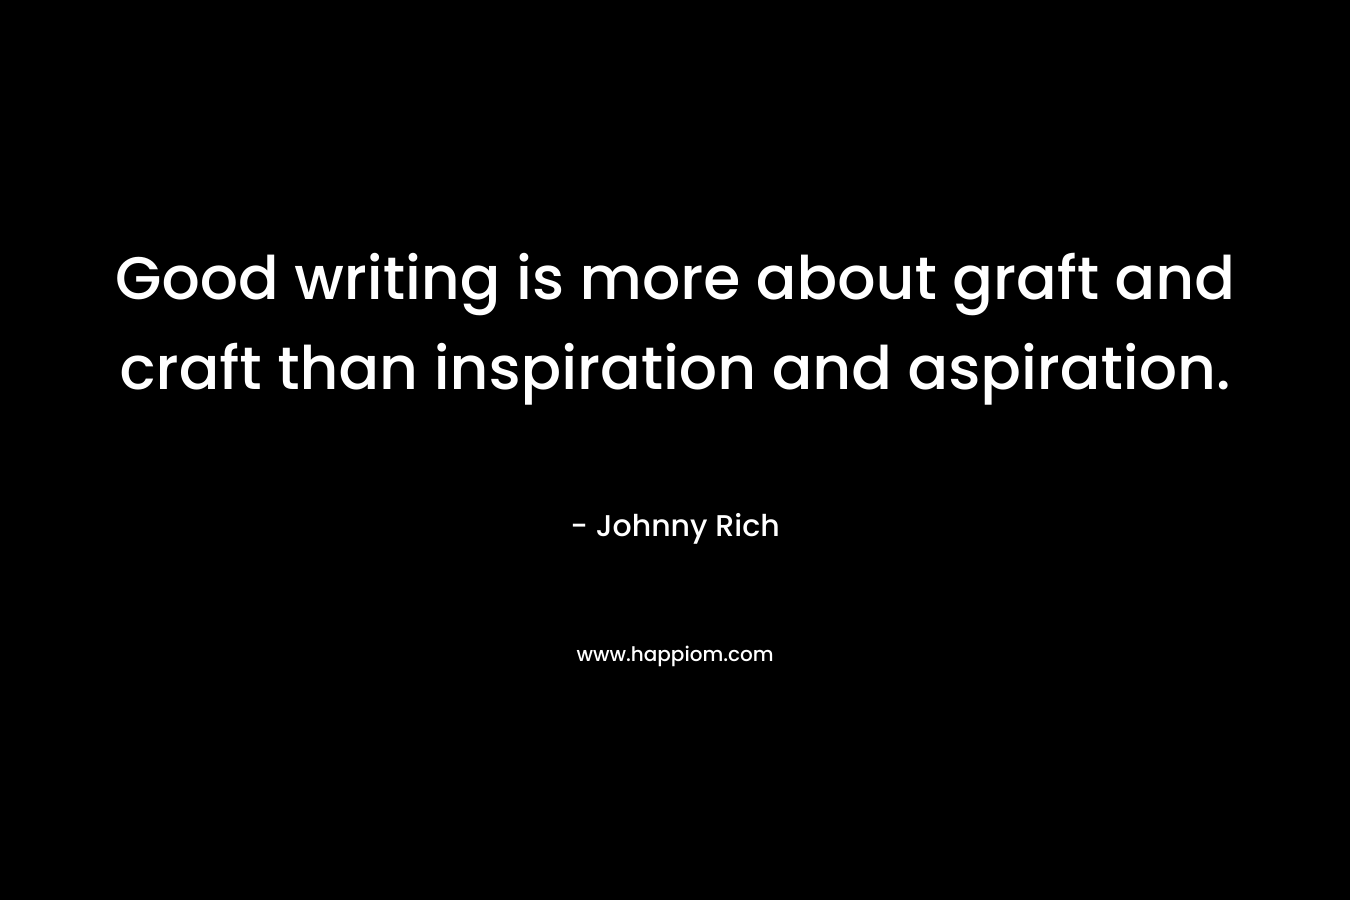 Good writing is more about graft and craft than inspiration and aspiration. – Johnny Rich